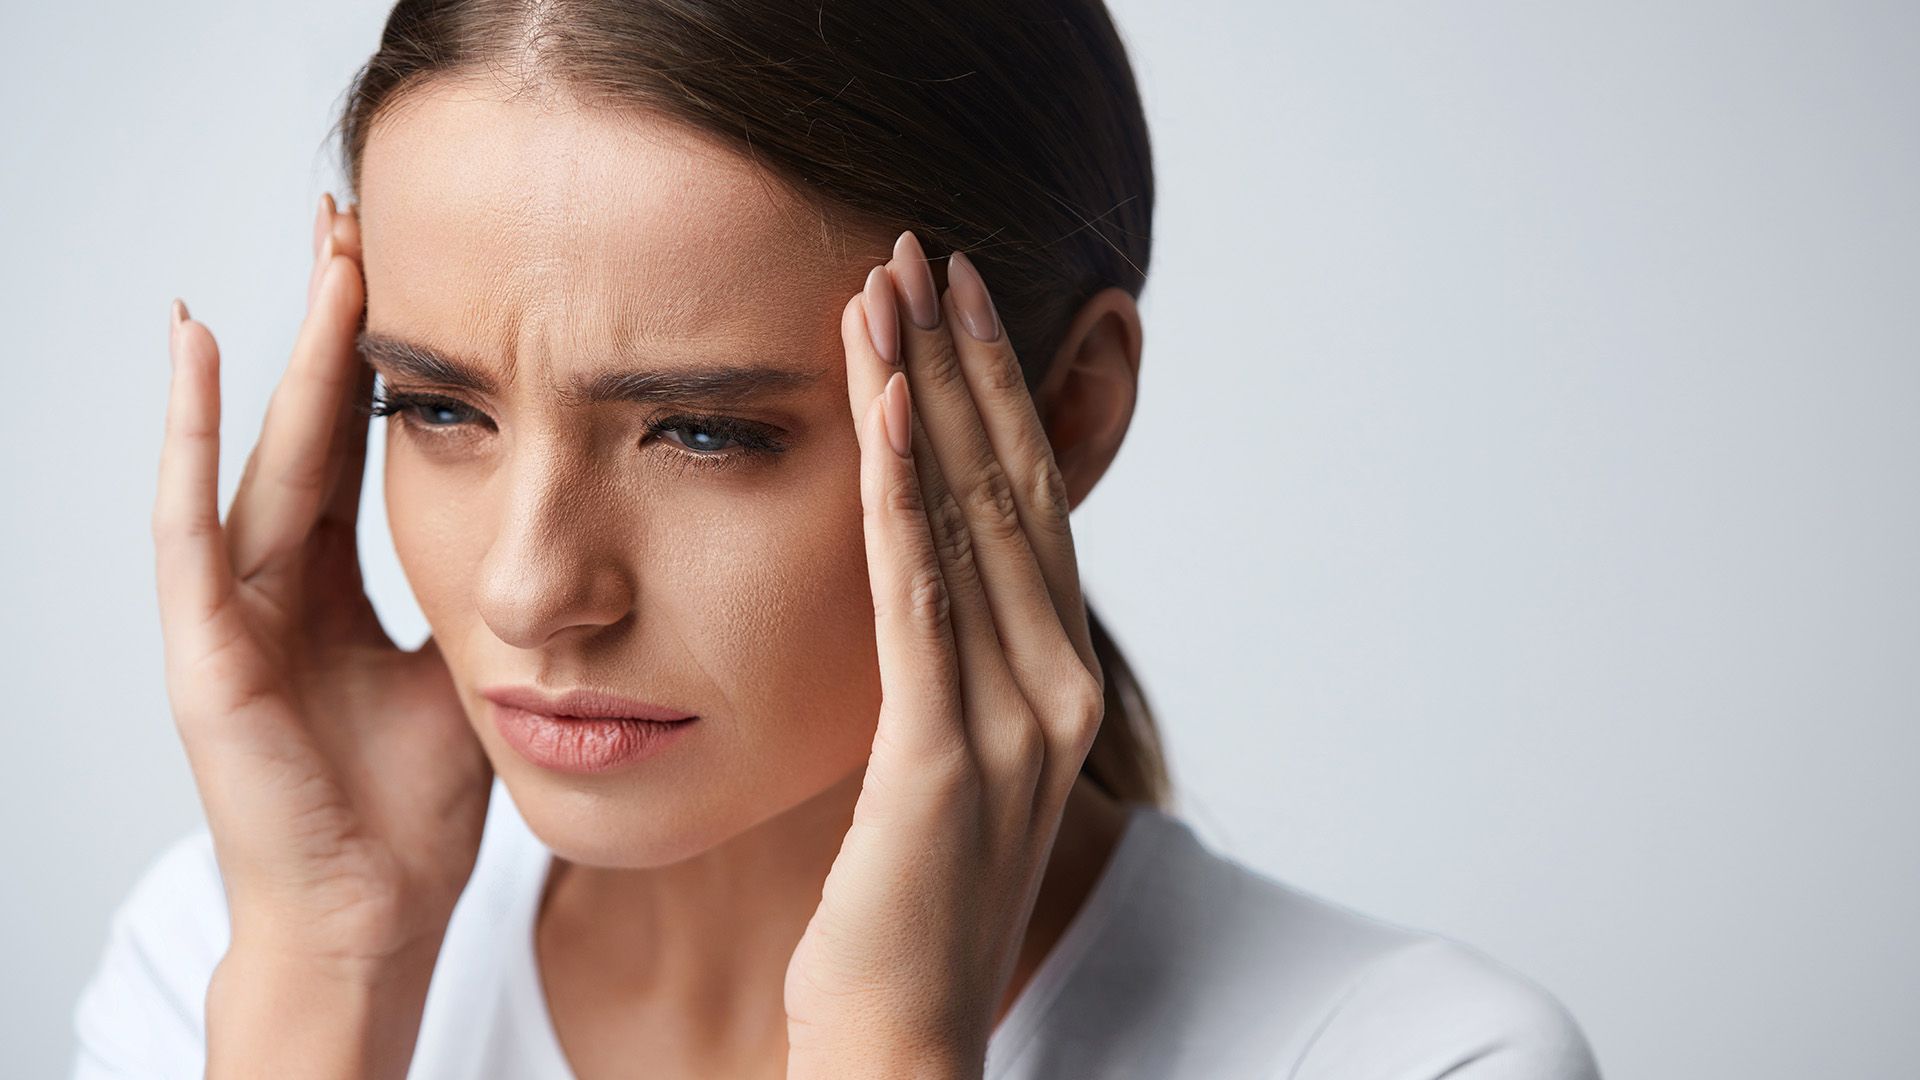 WHAT ARE MIGRAINE FORTIFICATION ILLUSIONS